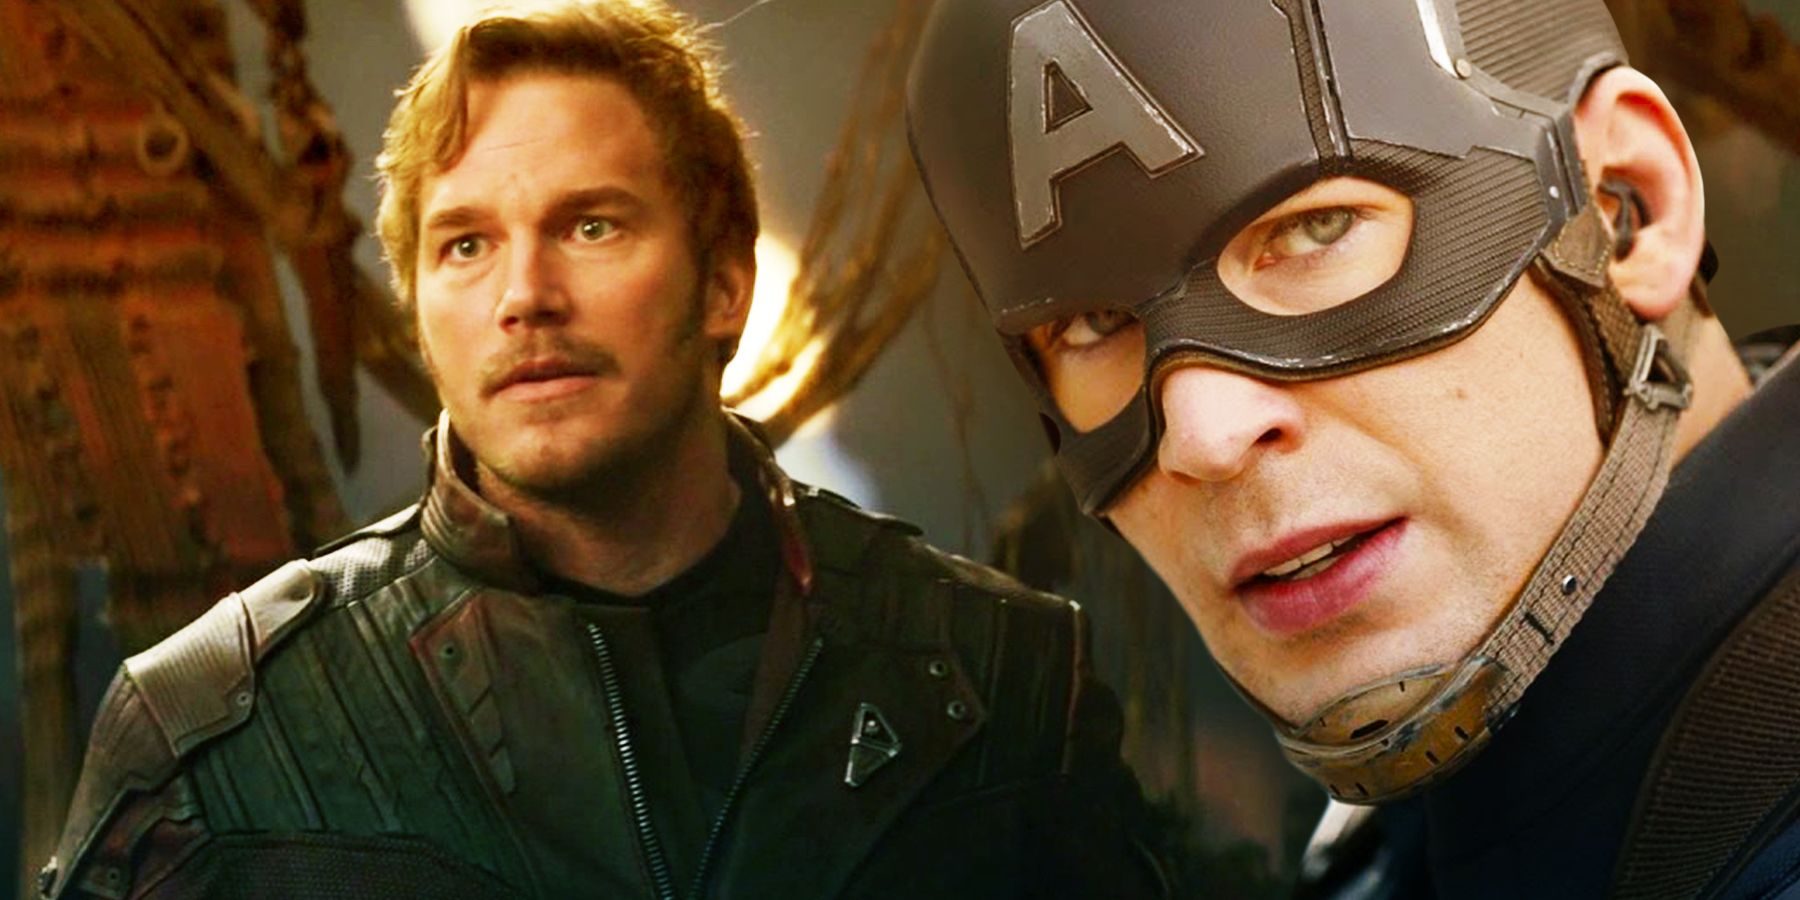 Starlord and Captain America from the MCU